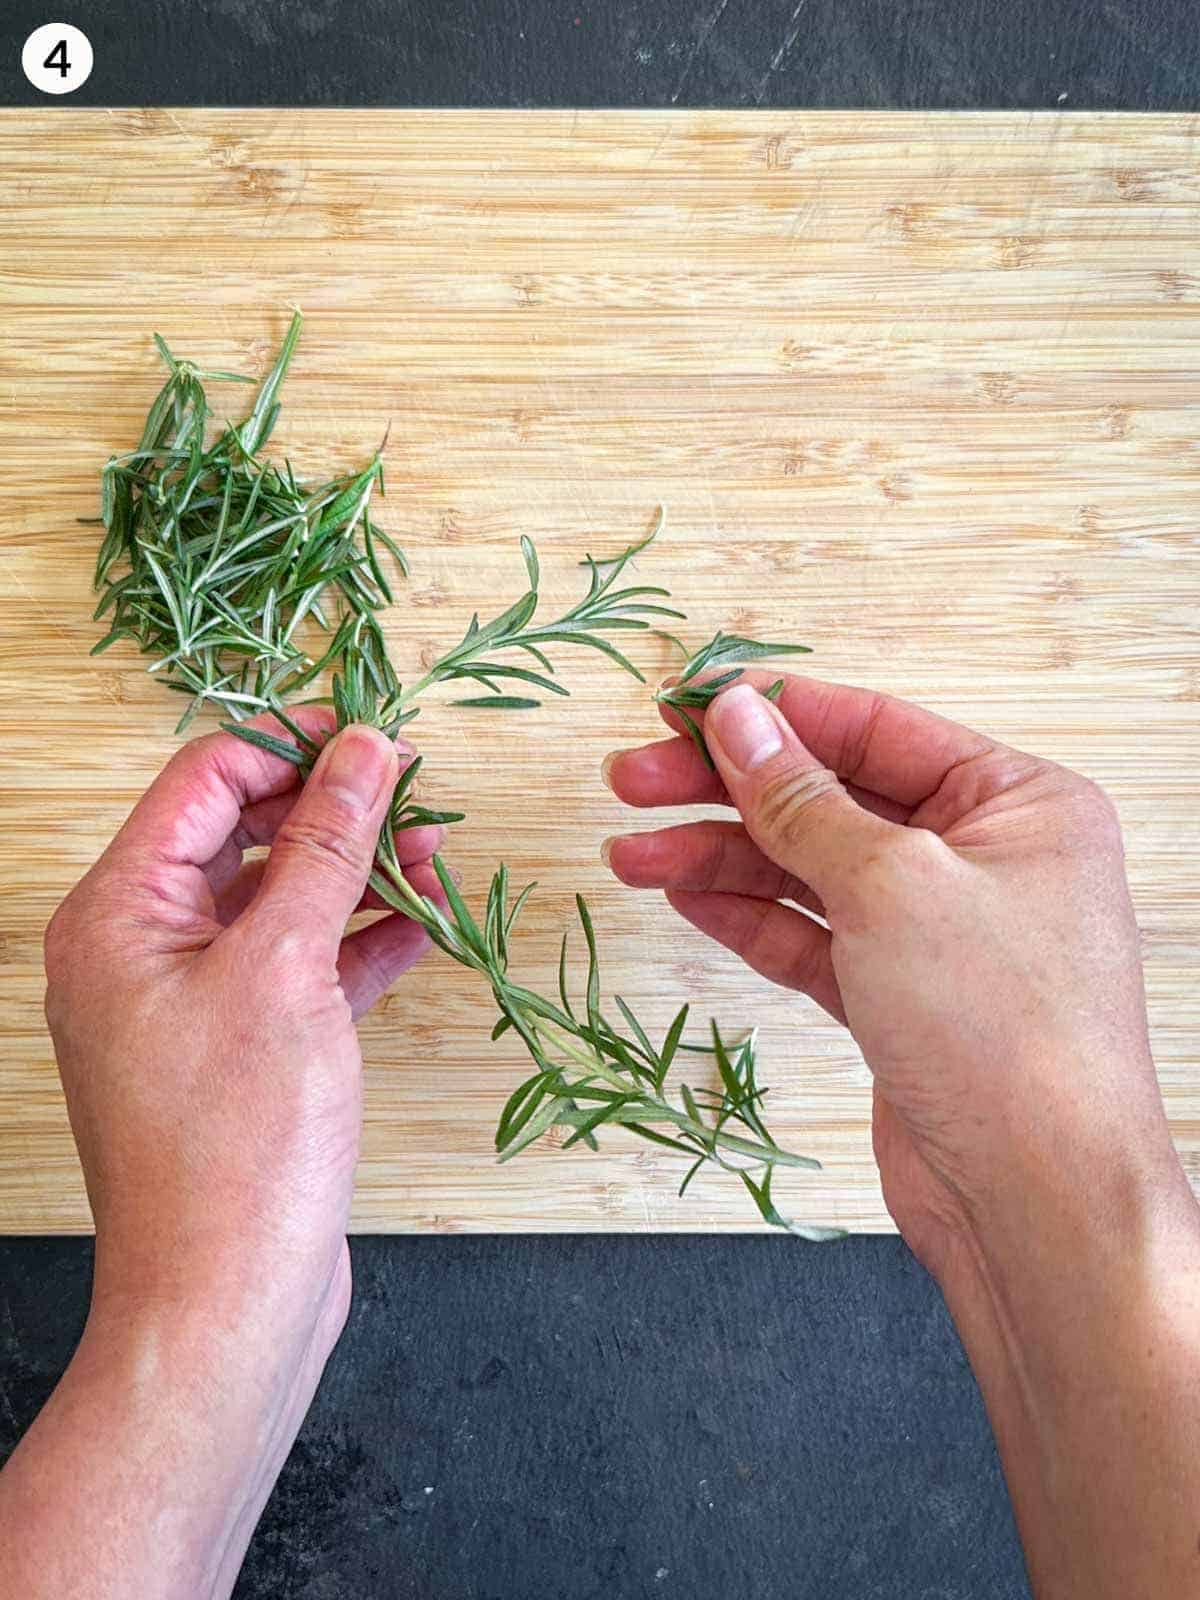 Picking the leaves off rosemary stems